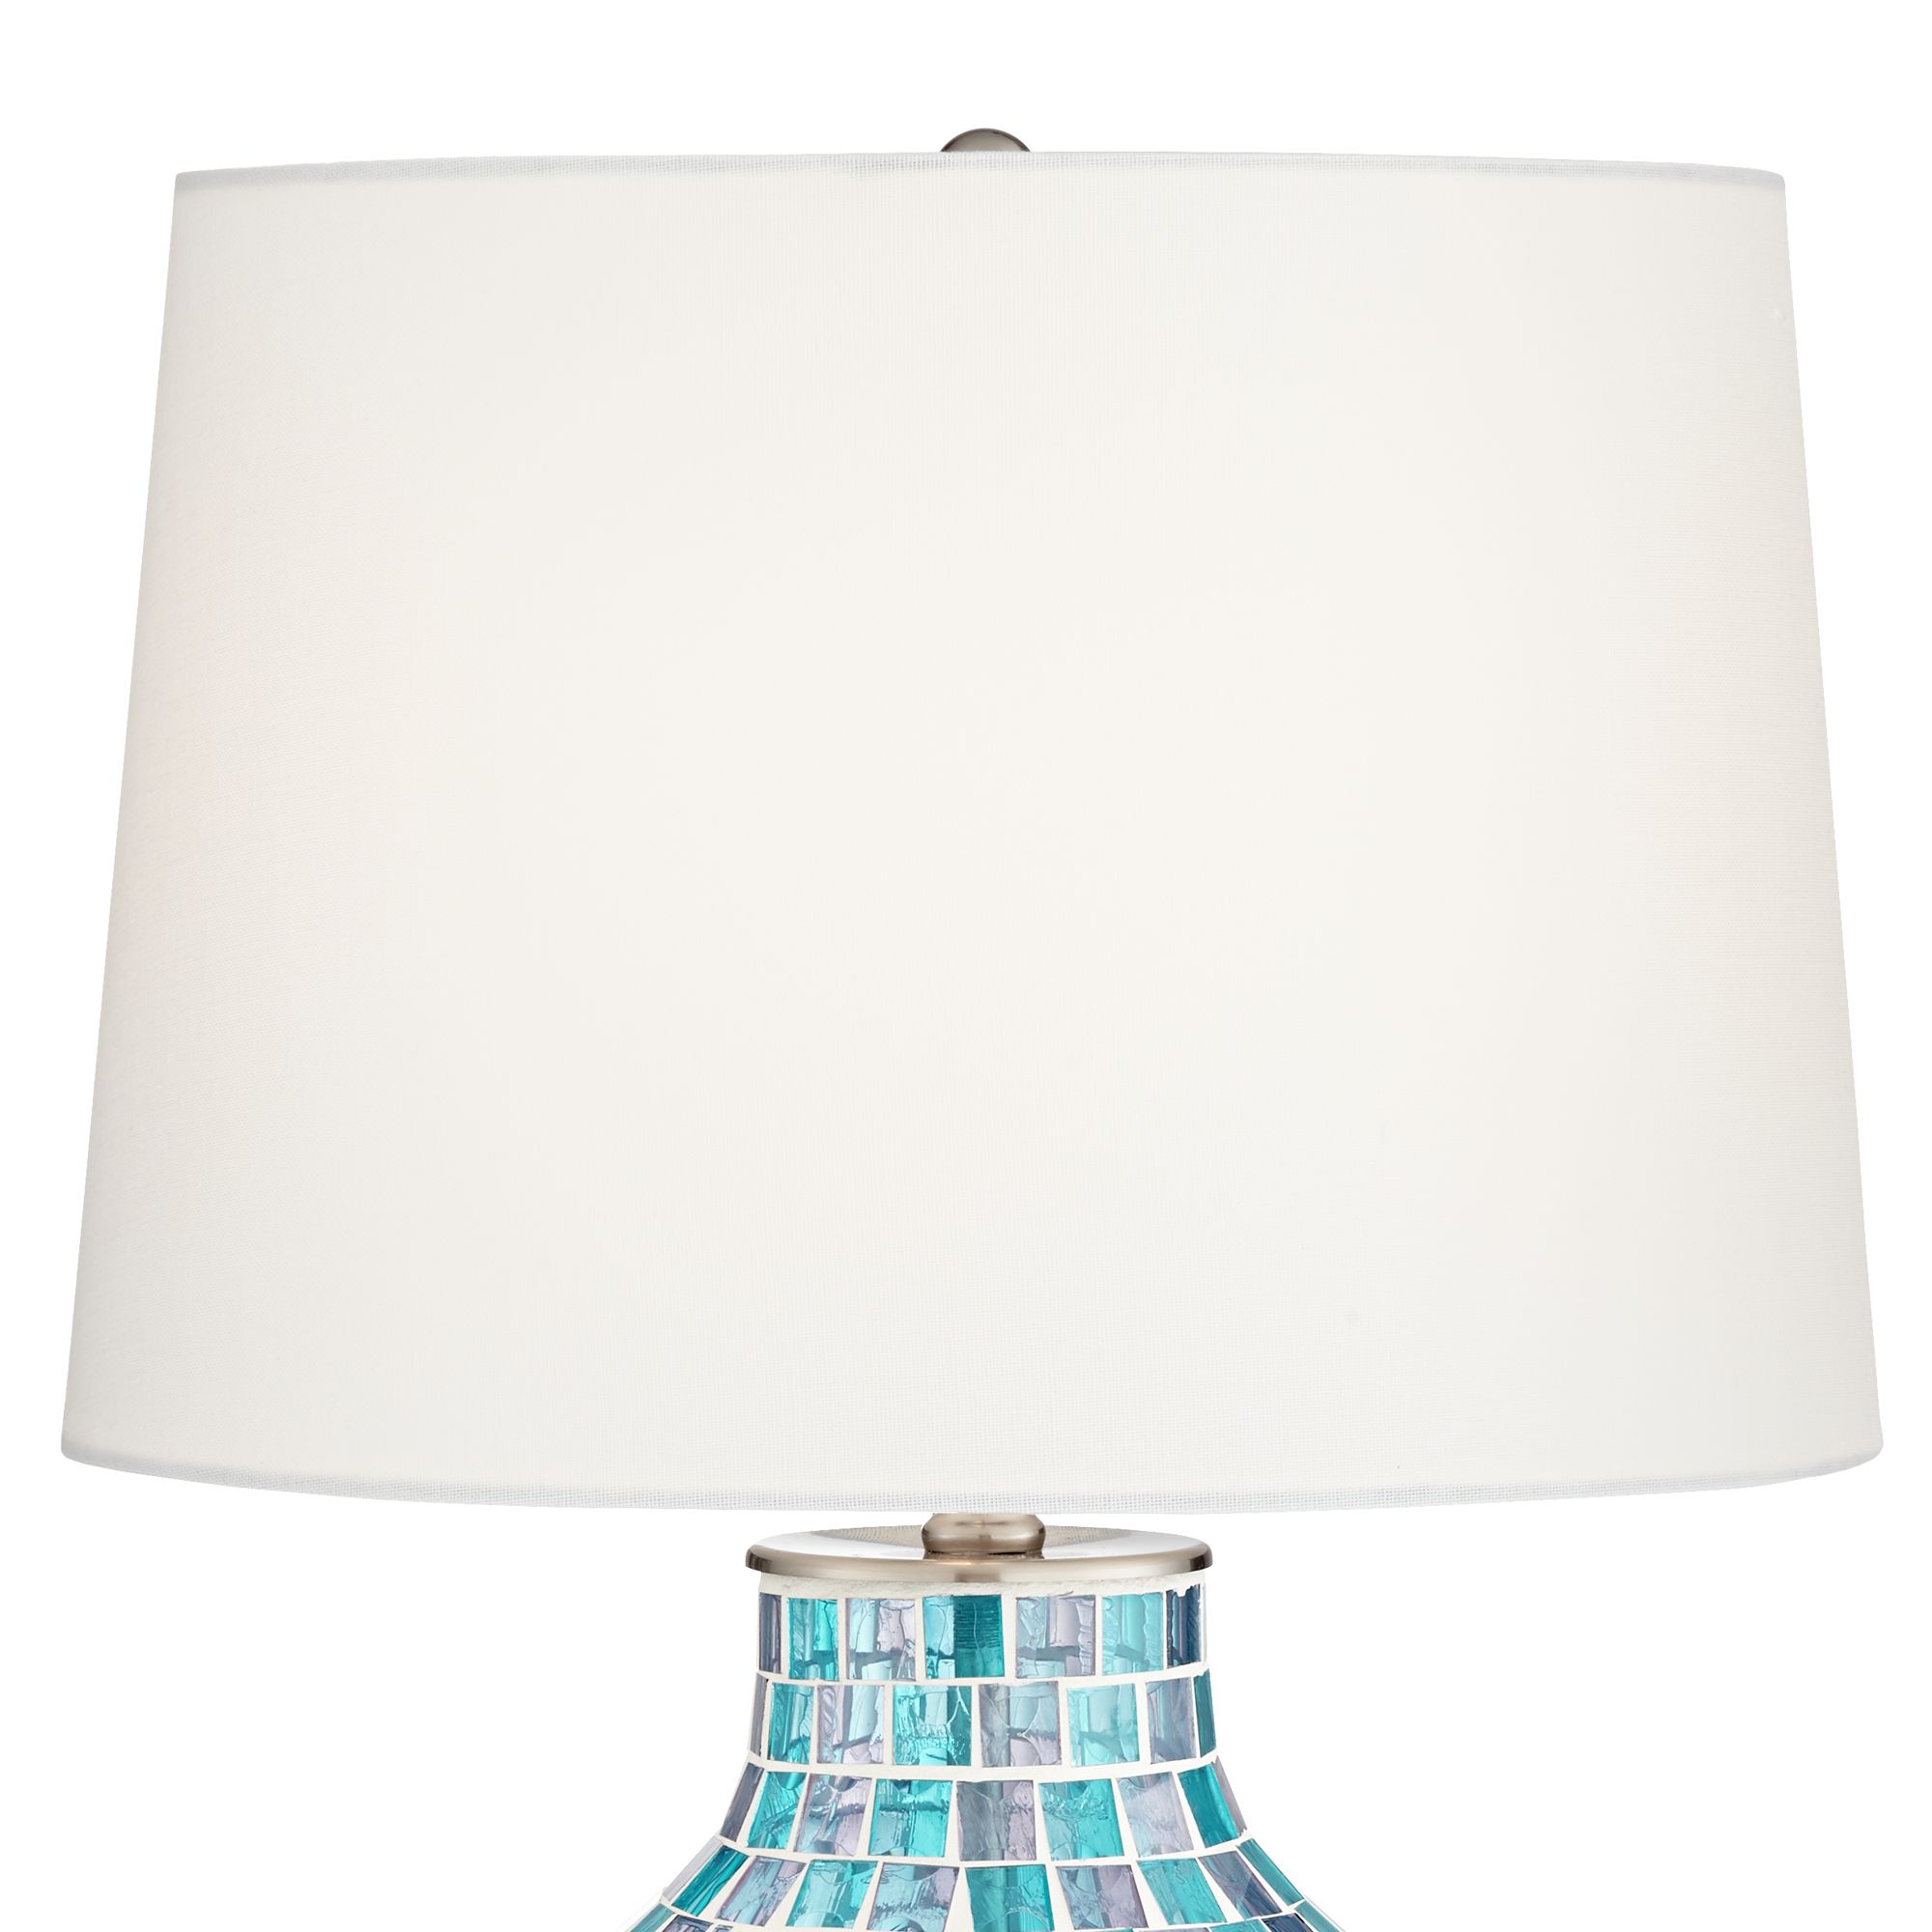 teal blue table lamp